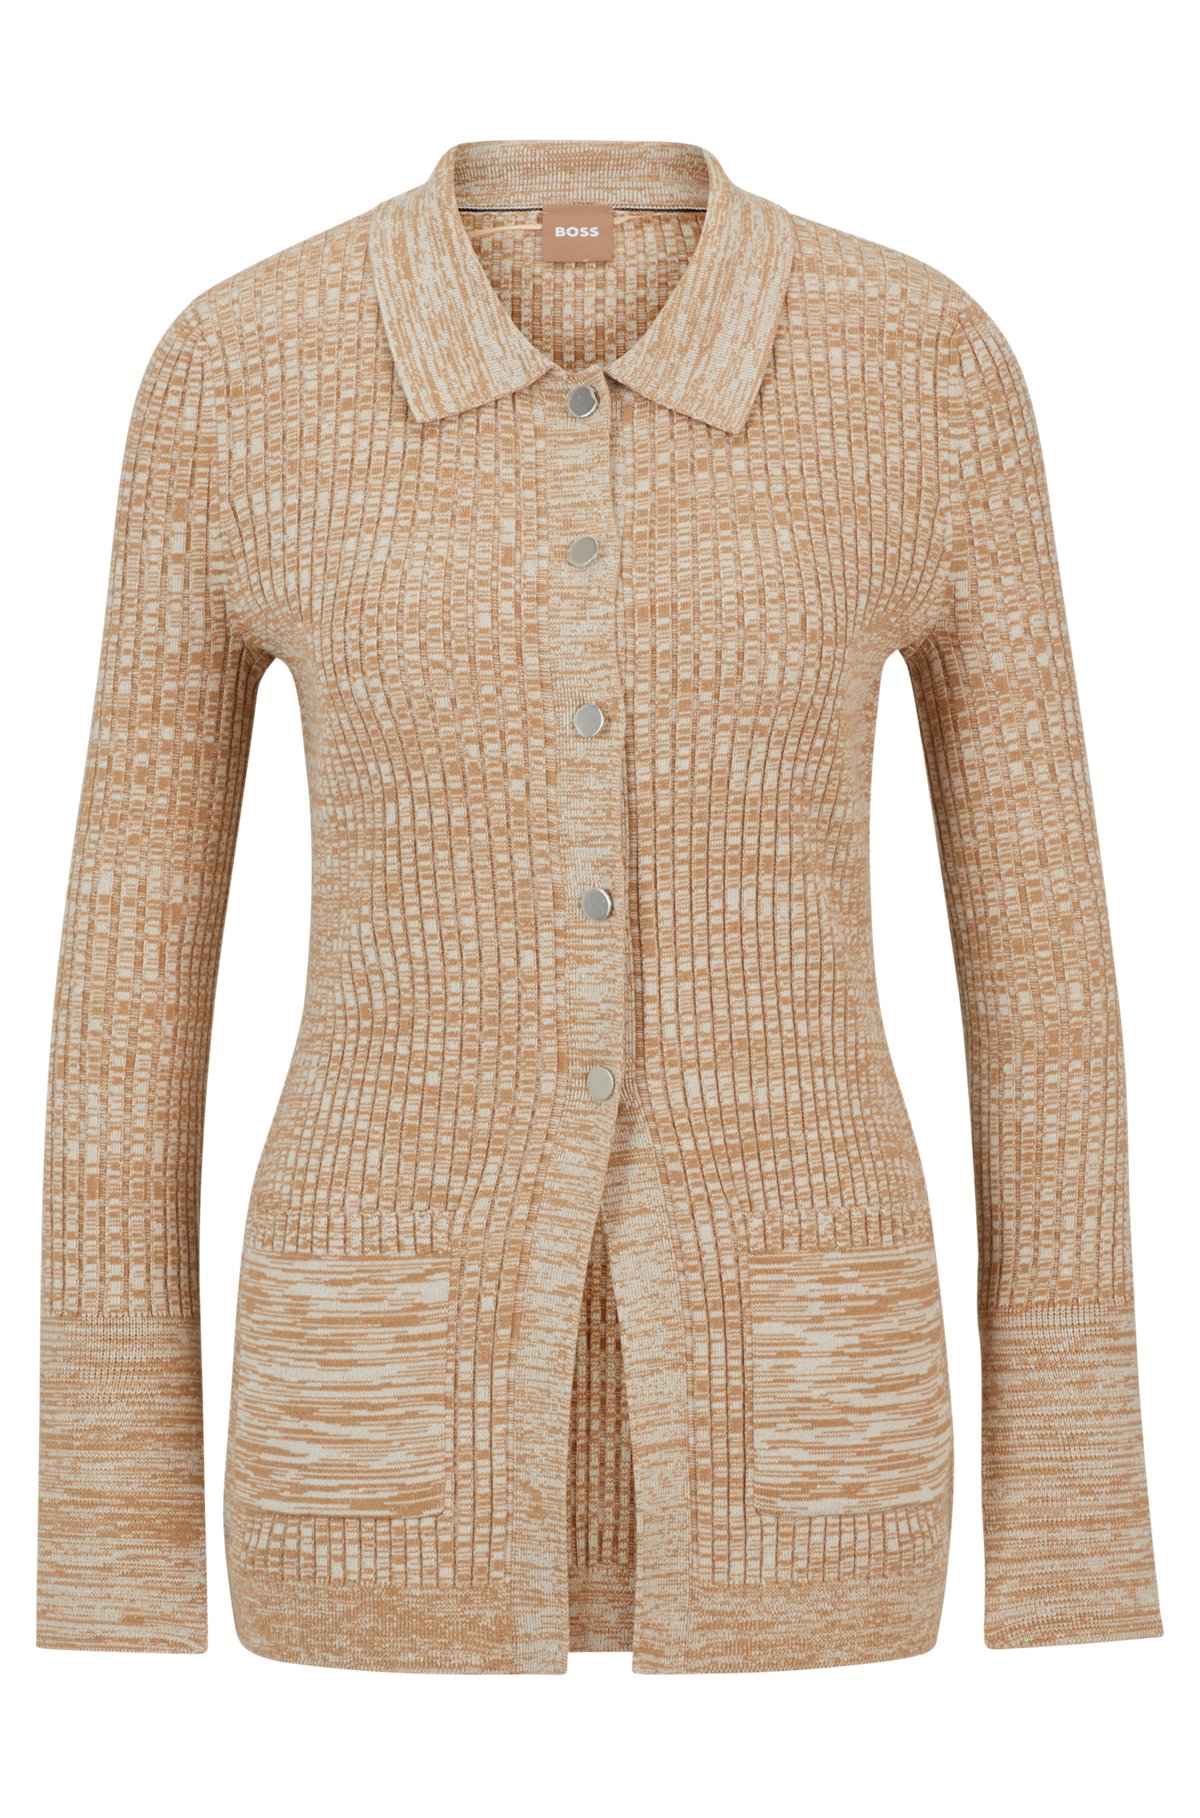 Mouliné ribbed cardigan with metallic monogram buttons, Beige